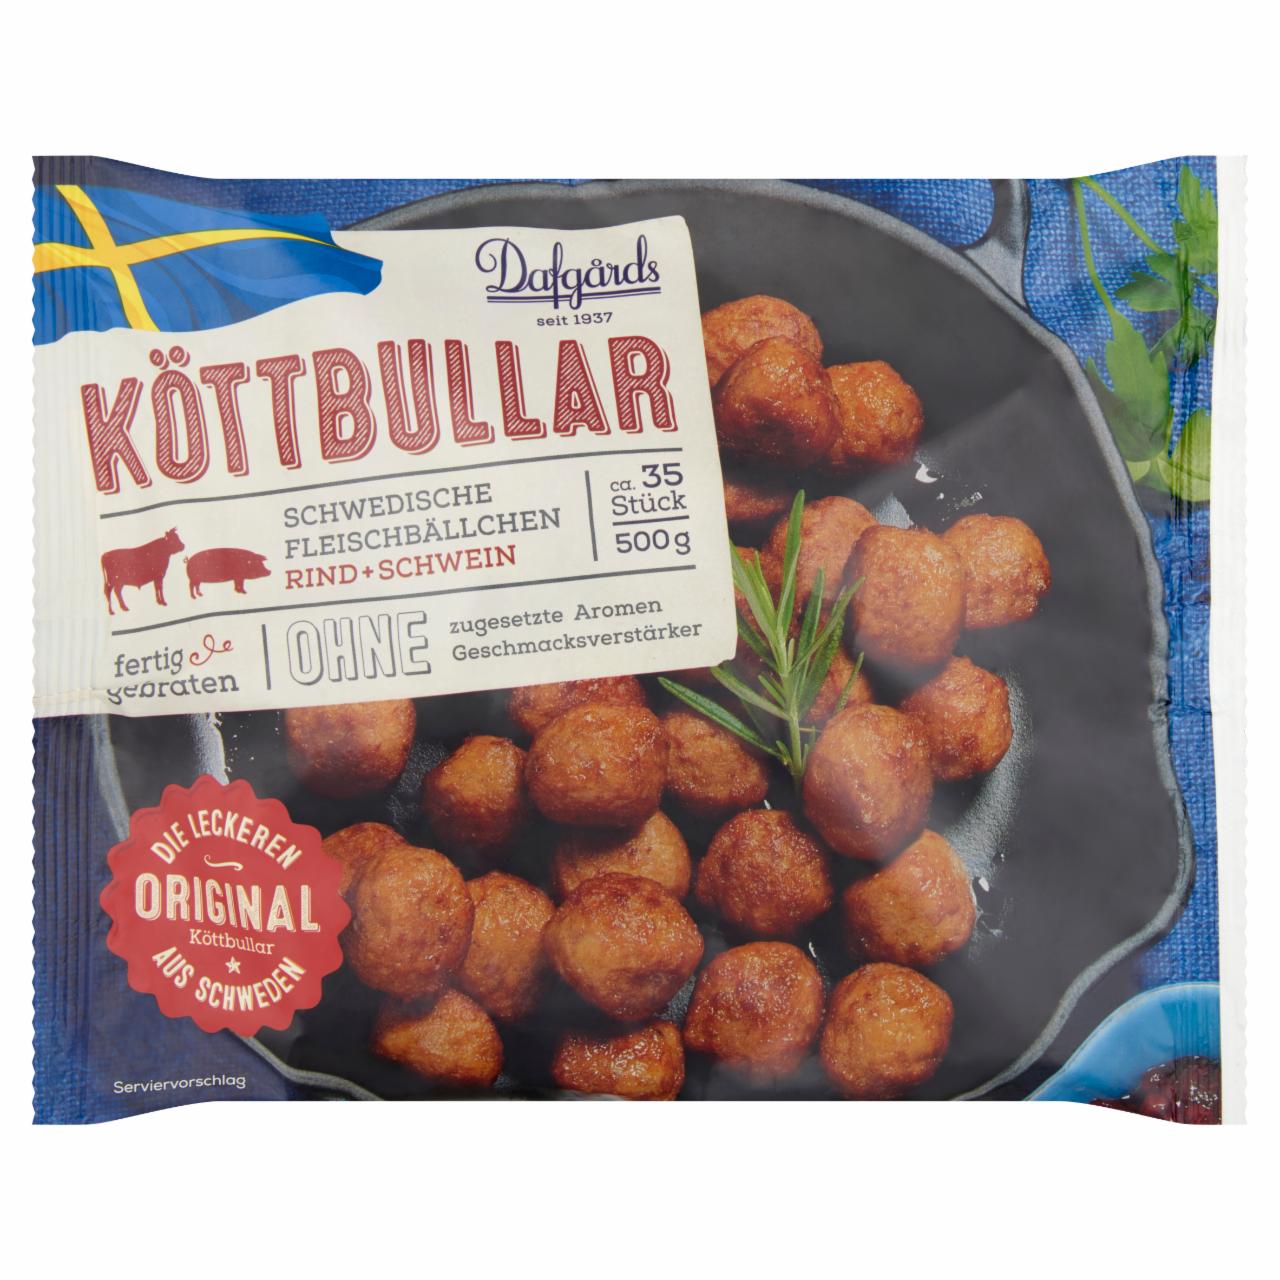 Photo - Dafgårds Swedish Meatballs from Beef and Pork 14 pcs 500 g